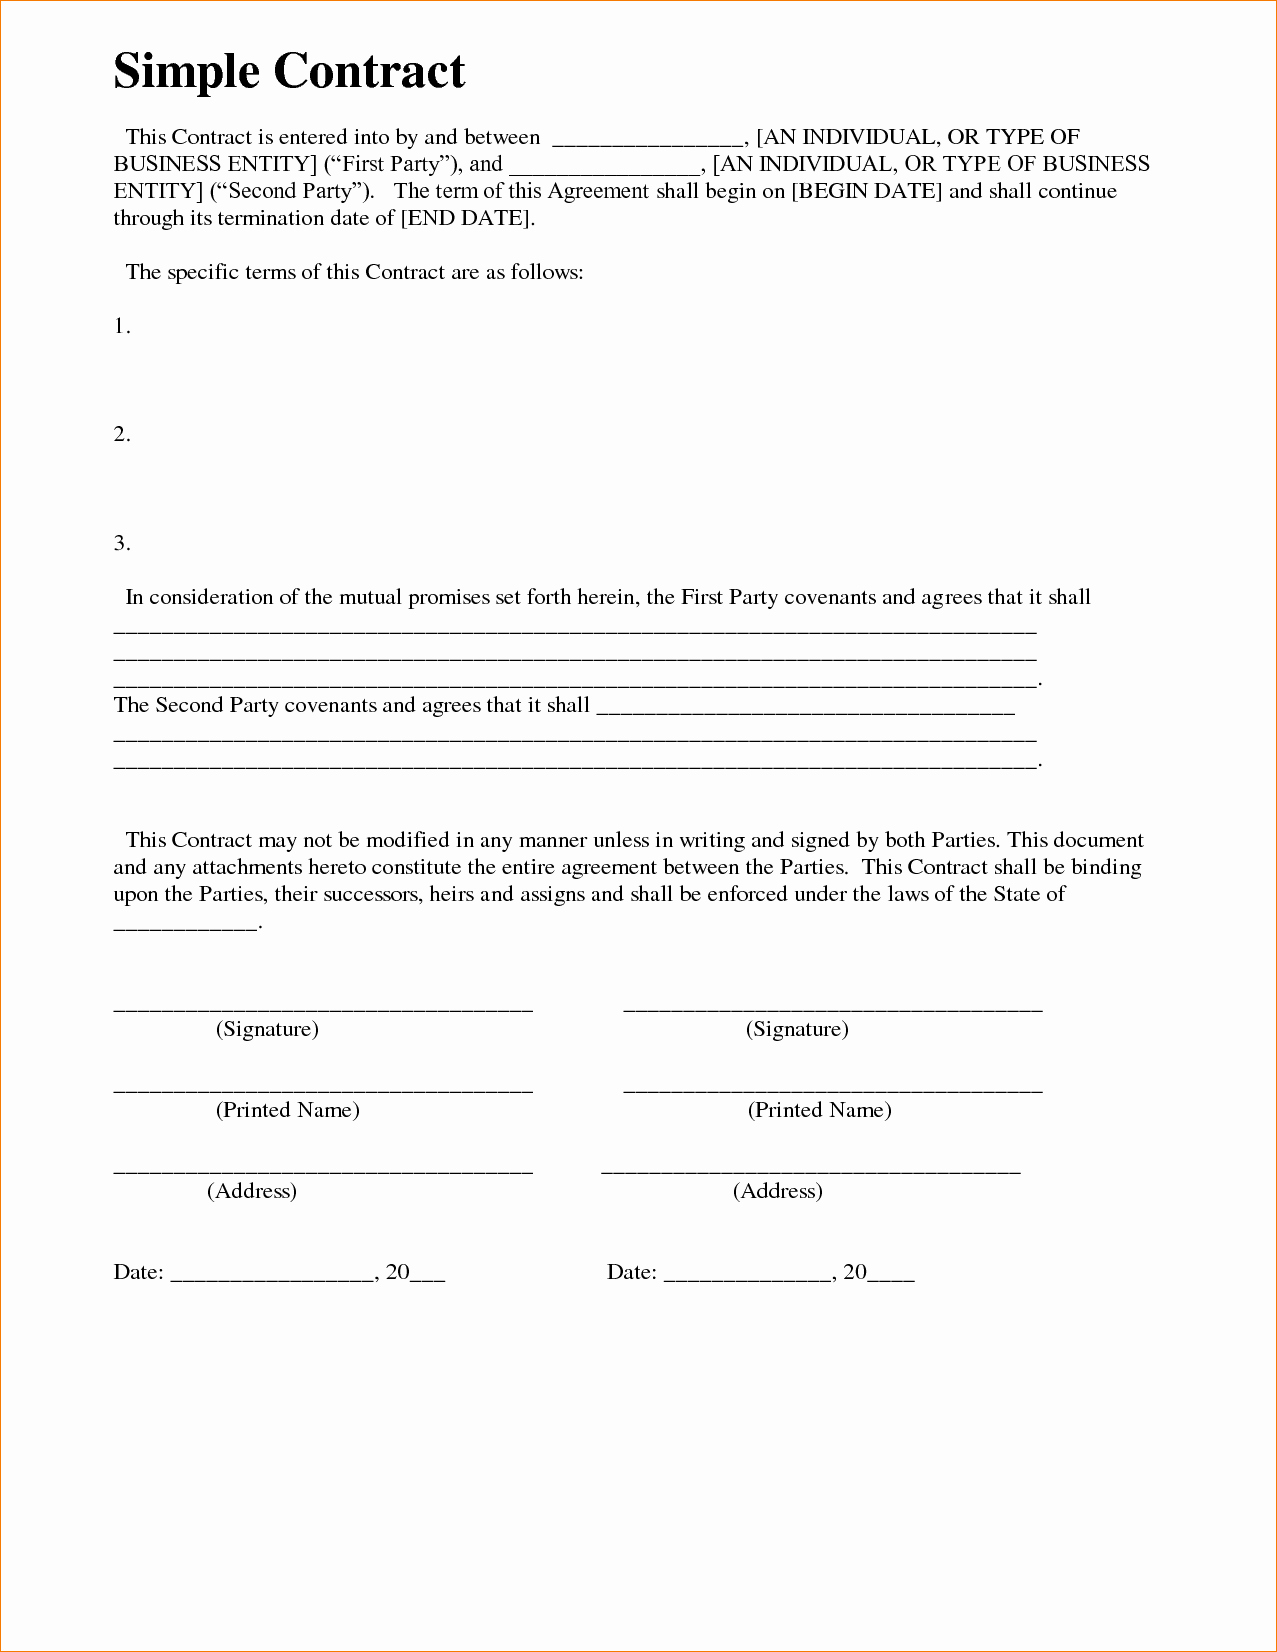 Simple Construction Contract Template Best Of Simple Contract Agreement